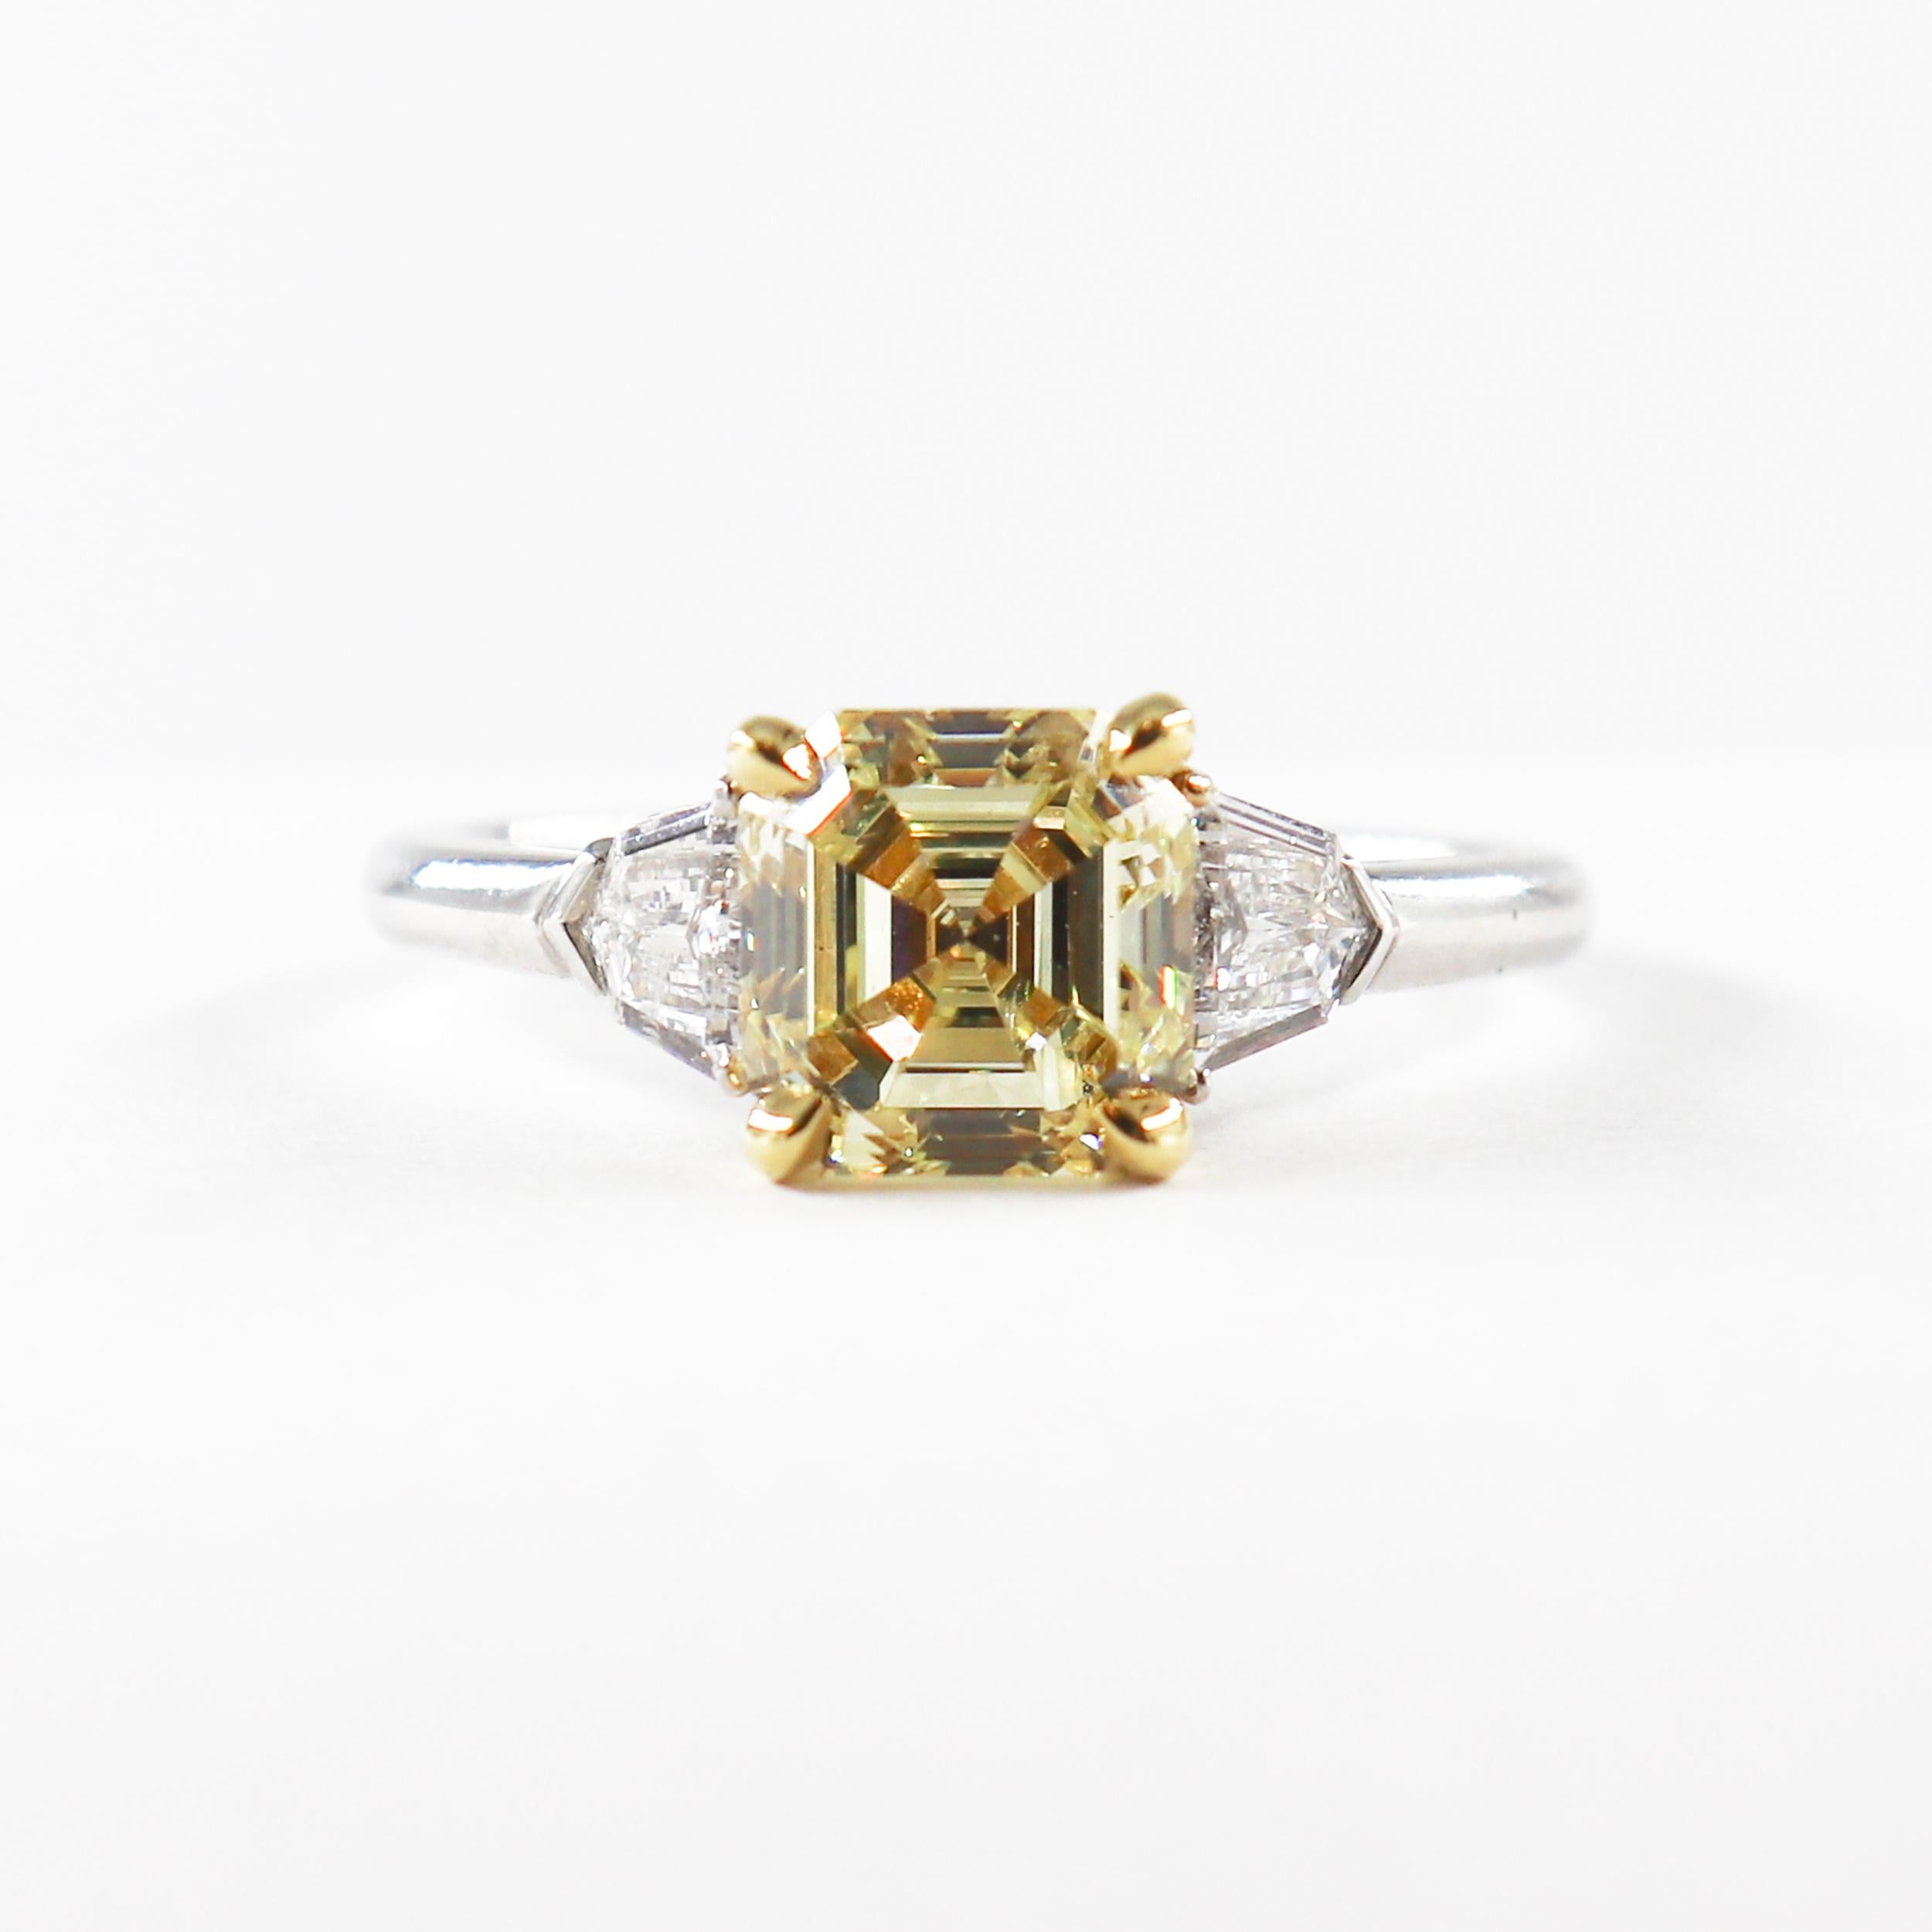 This exquisite piece by J. Birnbach combines classic style with a pop of color. The ring features a 1.94 carat GIA certified Fancy Yellow Asscher cut diamond, with a beautifully saturated color and lively sparkle. The yellow Asscher cut is set in